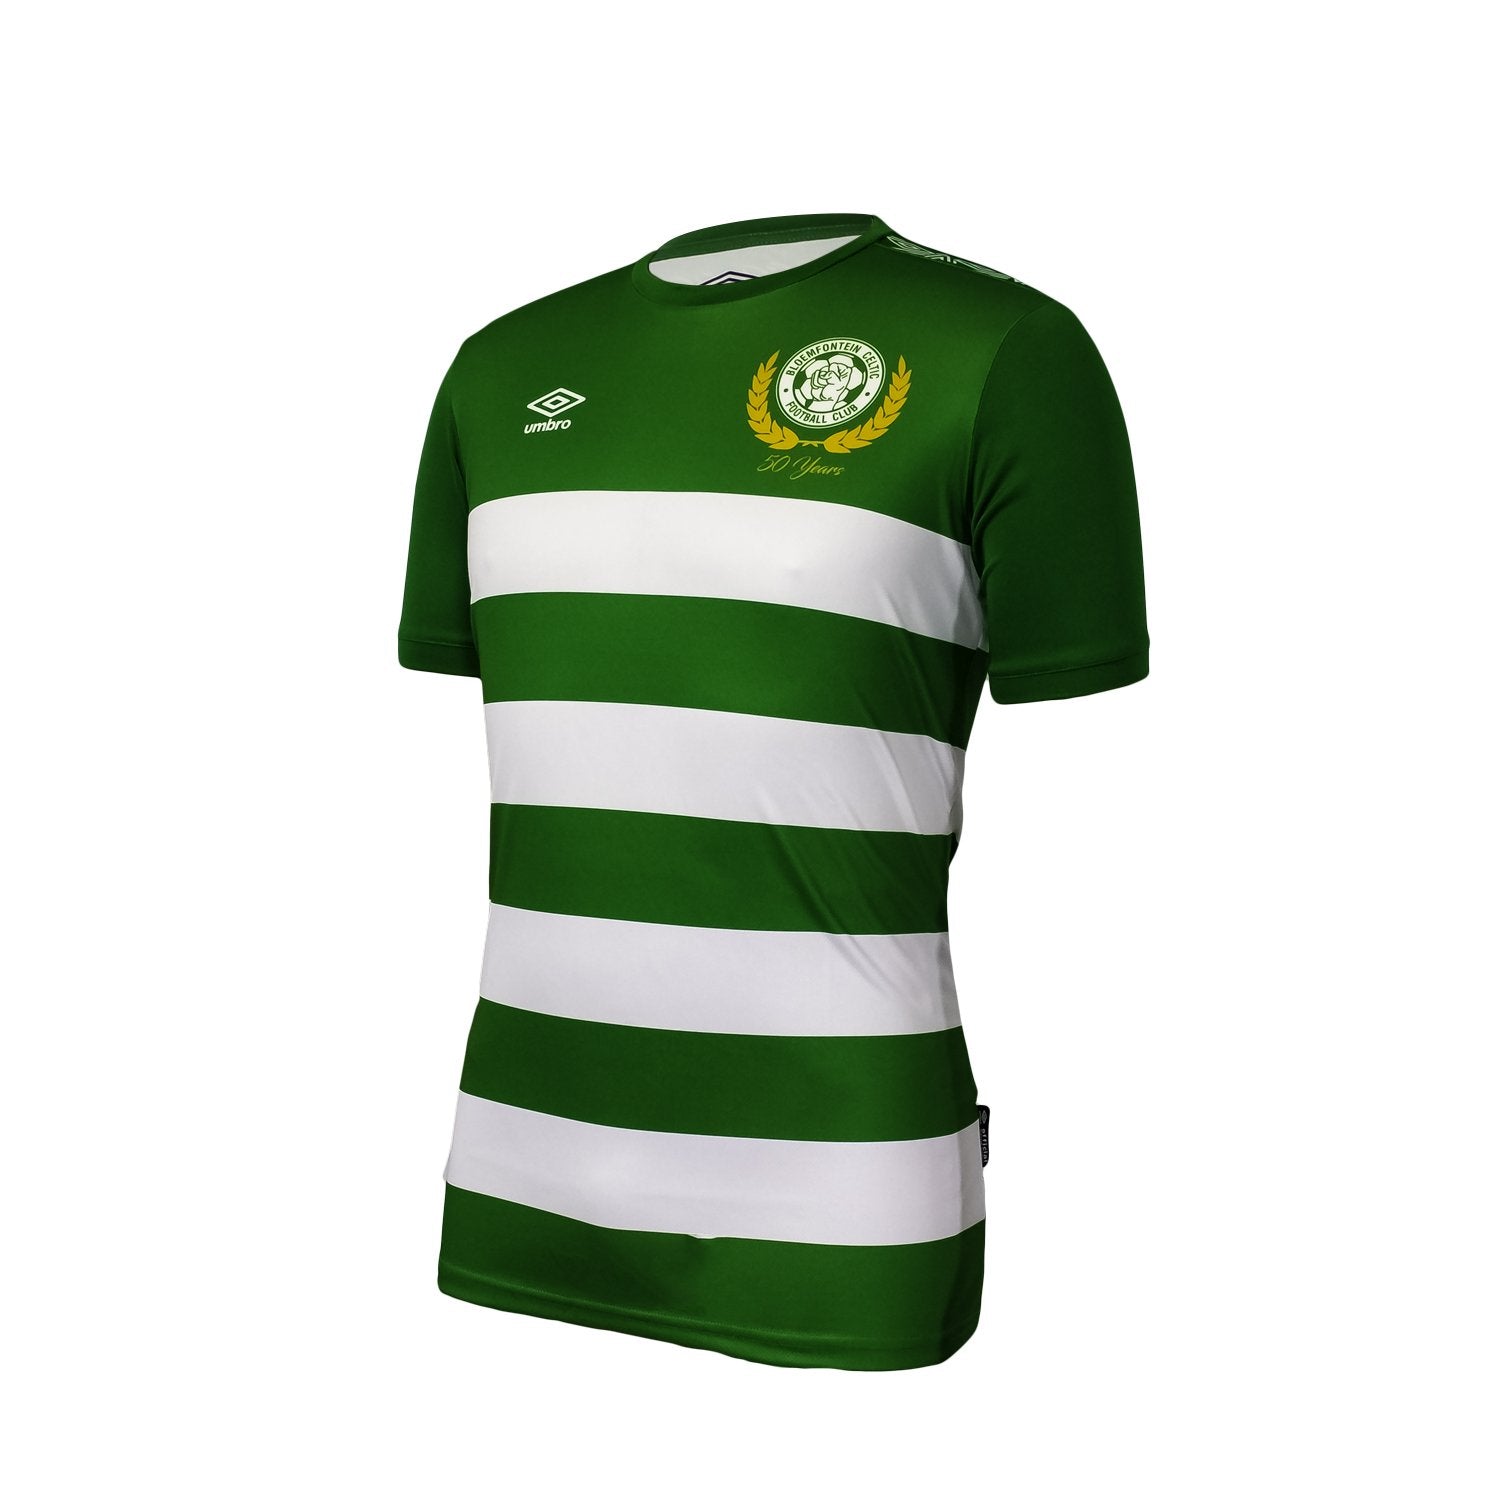 Shirts - ORIGINAL - KAPPA - Bloemfontein Celtic - (302DQt0) - Large- Brand  New was sold for R101.00 on 28 Sep at 23:01 by brandseller in Bloemfontein  (ID:247140045)